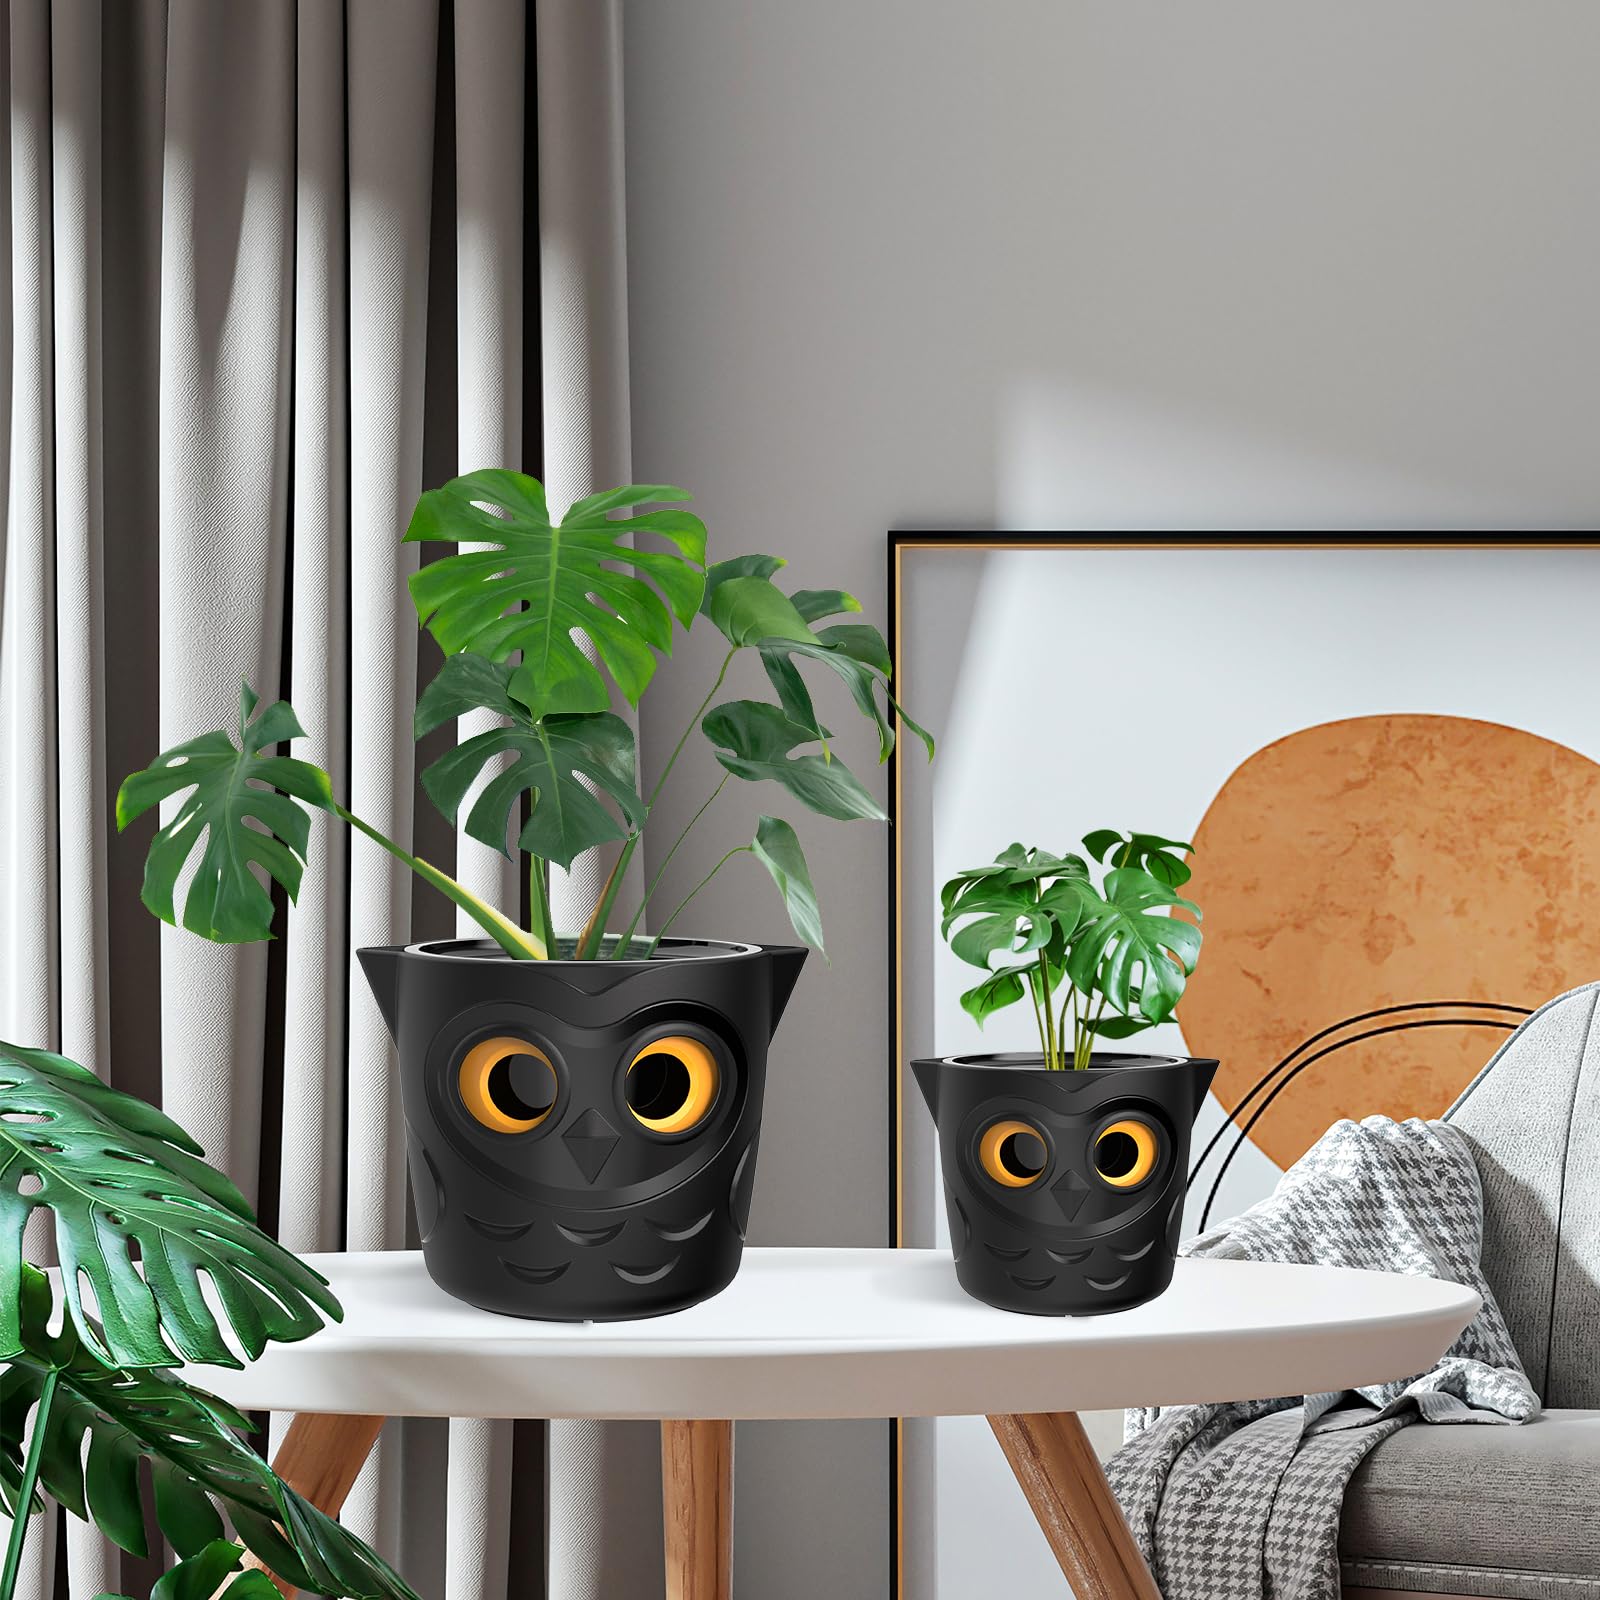 Restmo 3 Pack Plant Pots, 5” Self Watering Planters for Indoor Plants, Plastic Flower Pots with Owl Eye Water Level Indicator, for House Plants, African Violet, Succulents, Monstera, Dark Black